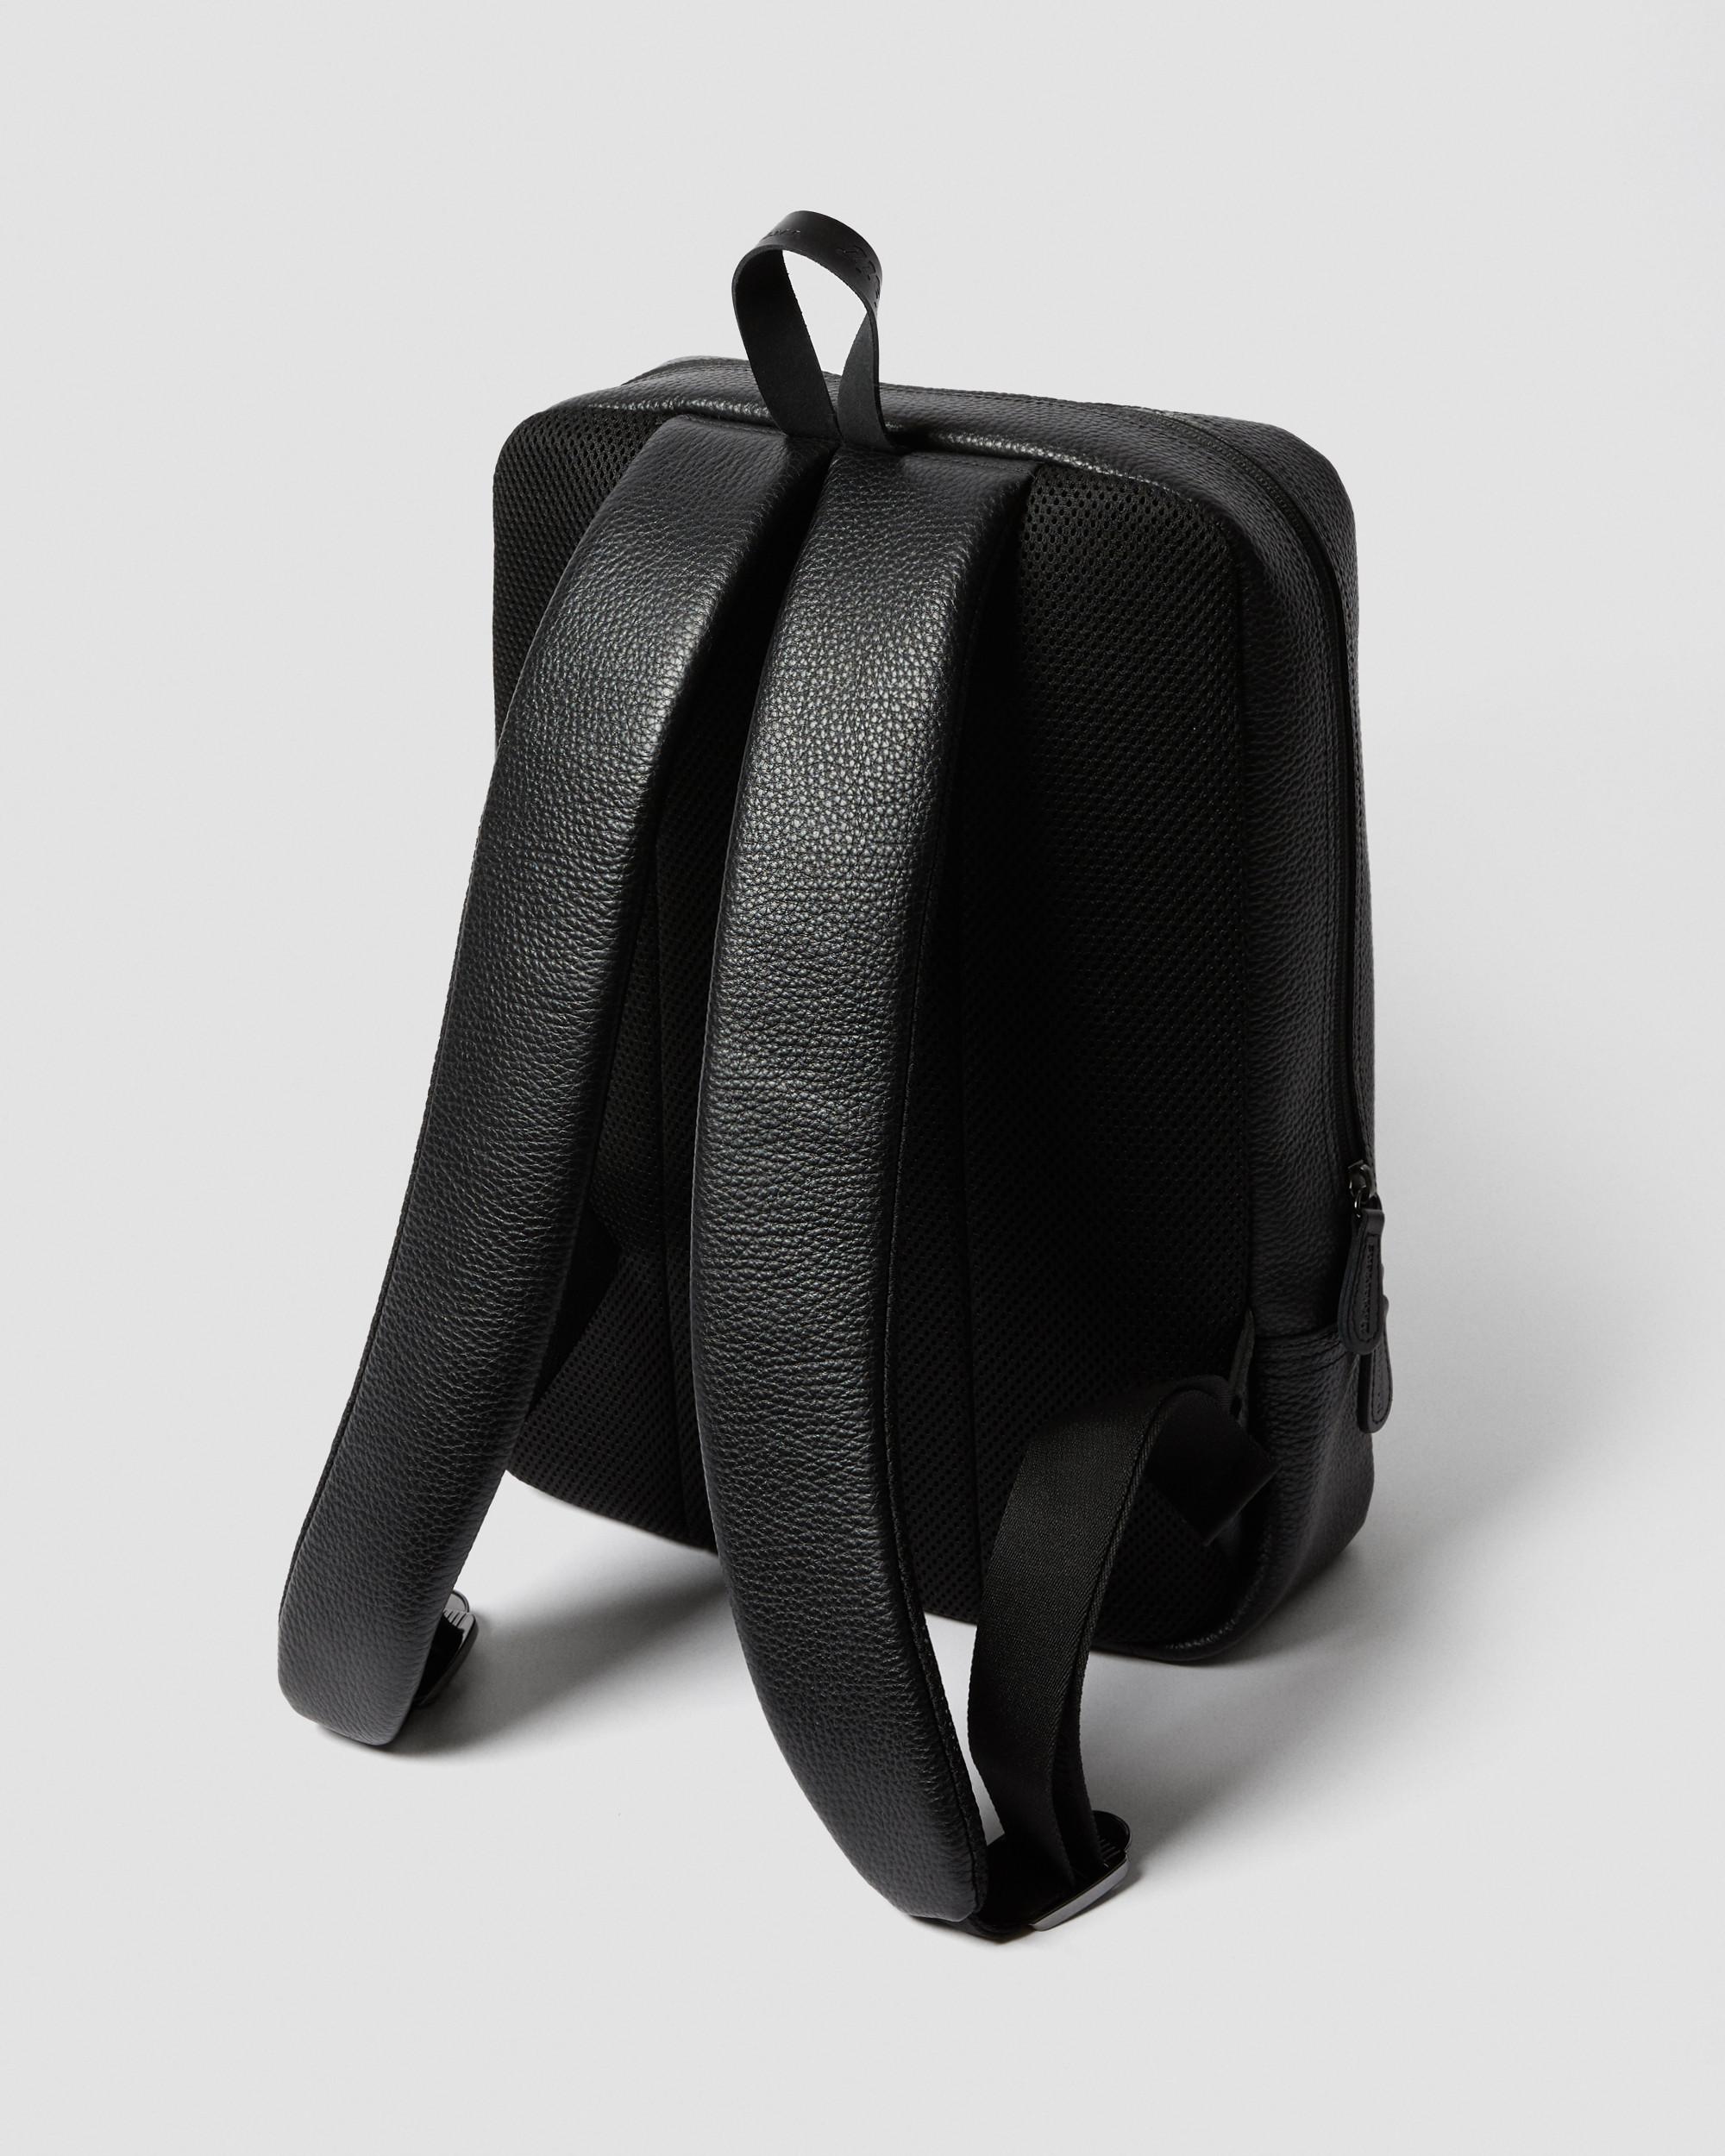 Milled Nappa Soft Leather Tote Bag in Black+Black